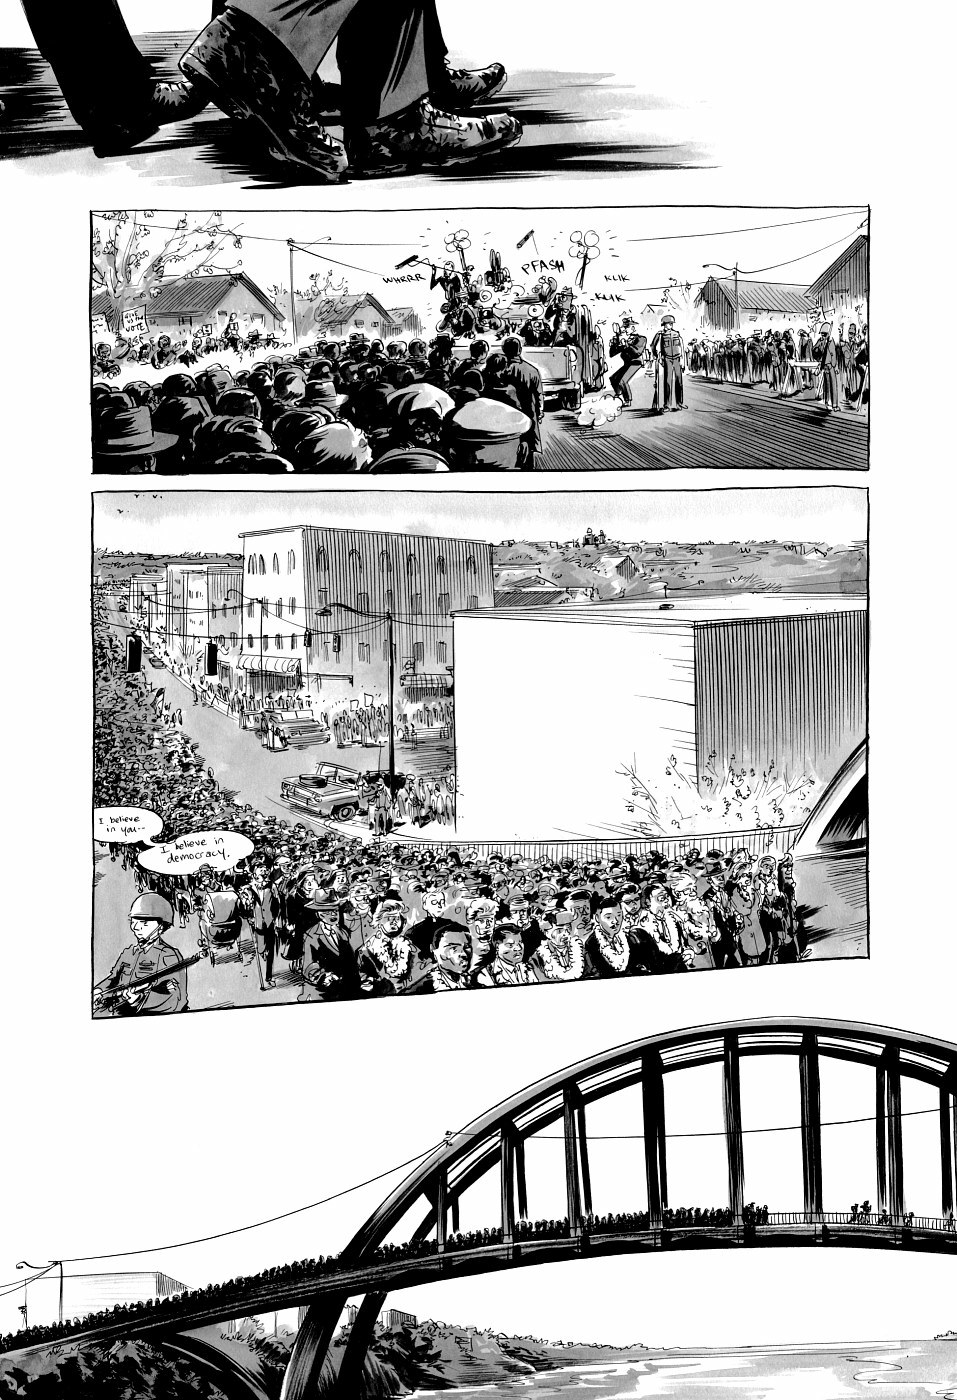 page 230 of march book three graphic novel